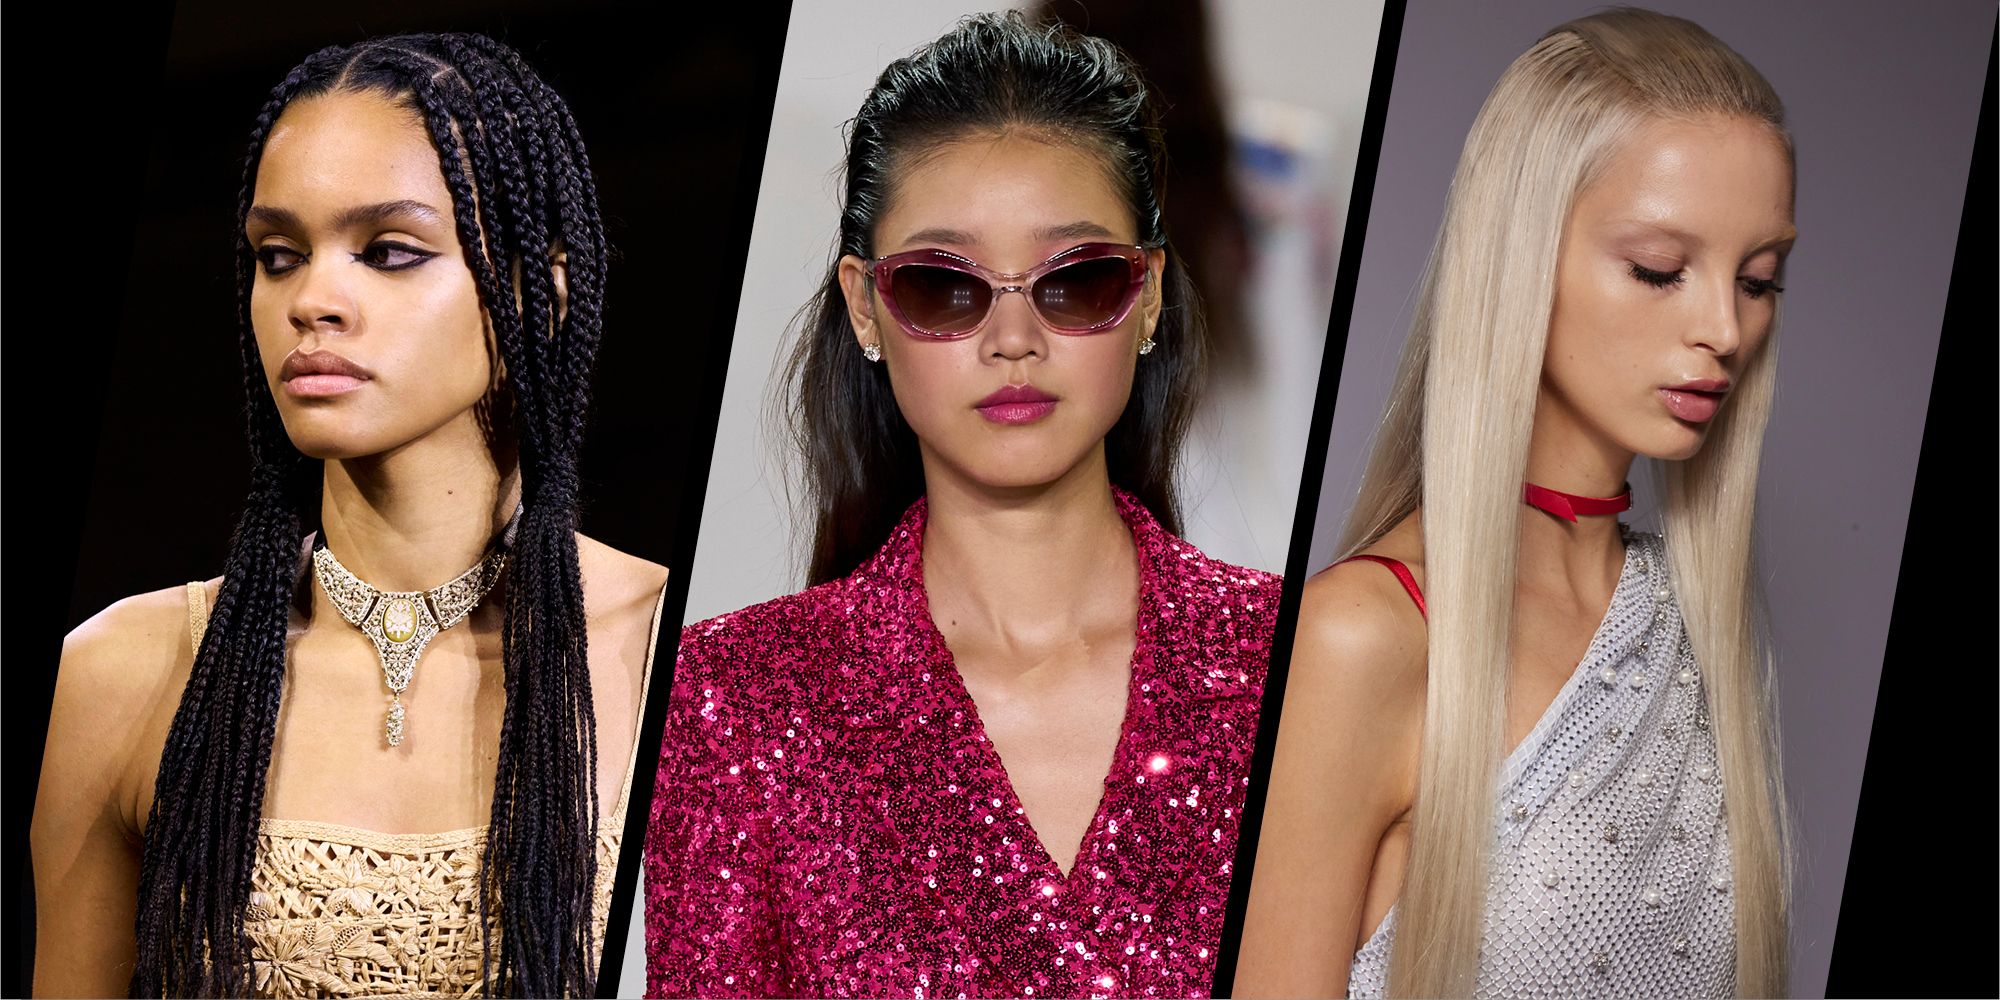 Braided Ponytails Are Trending for Spring 2023